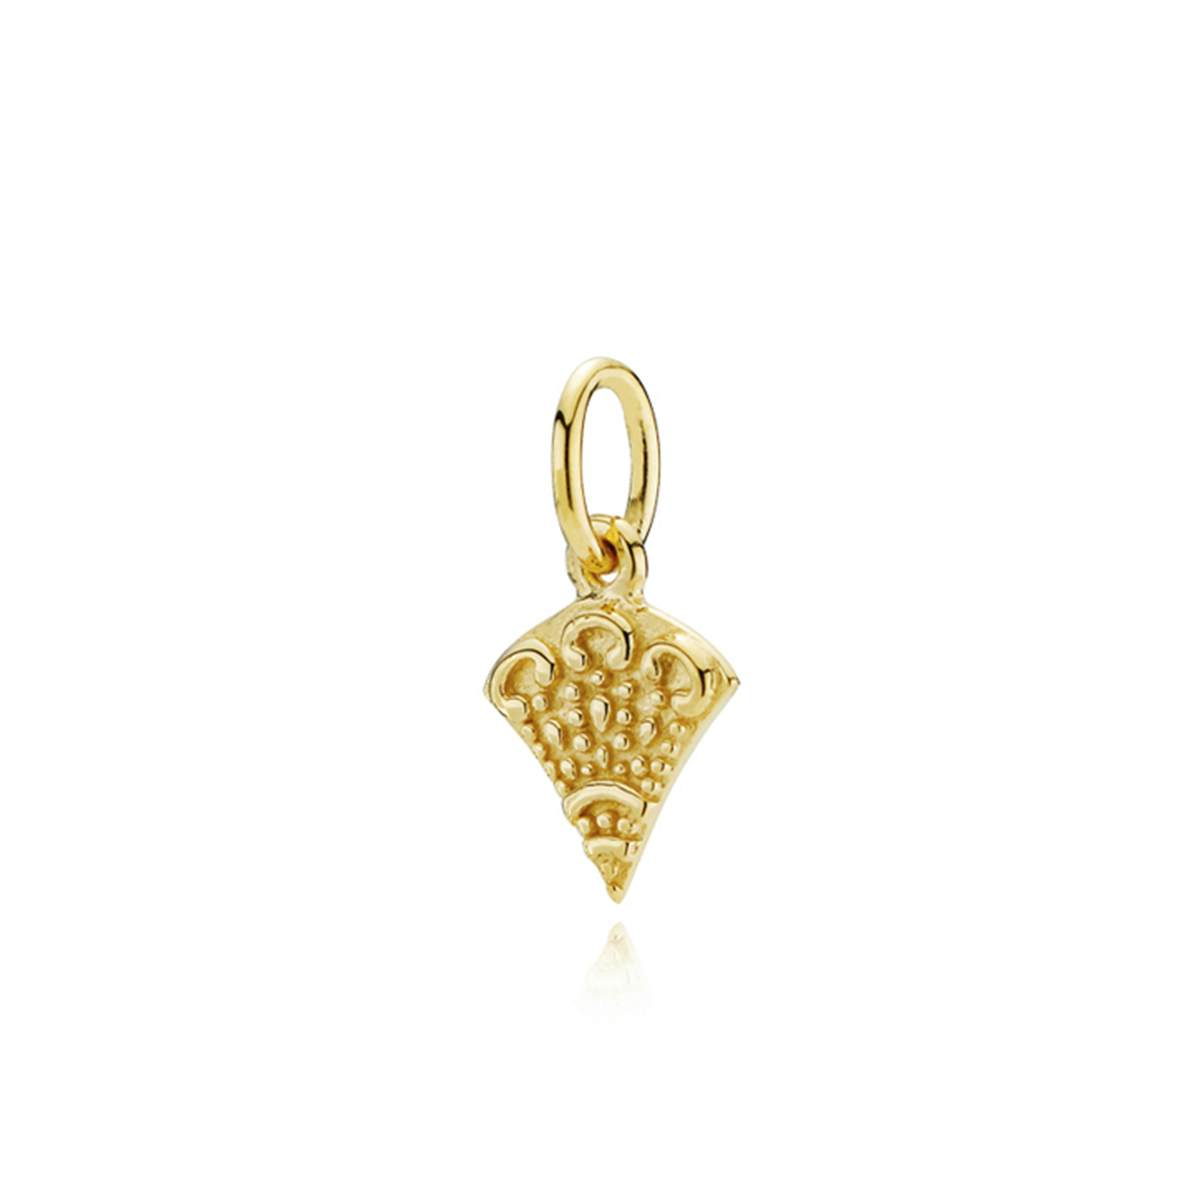 Bohemian Pendant from Izabel Camille in Goldplated-Silver Sterling 925